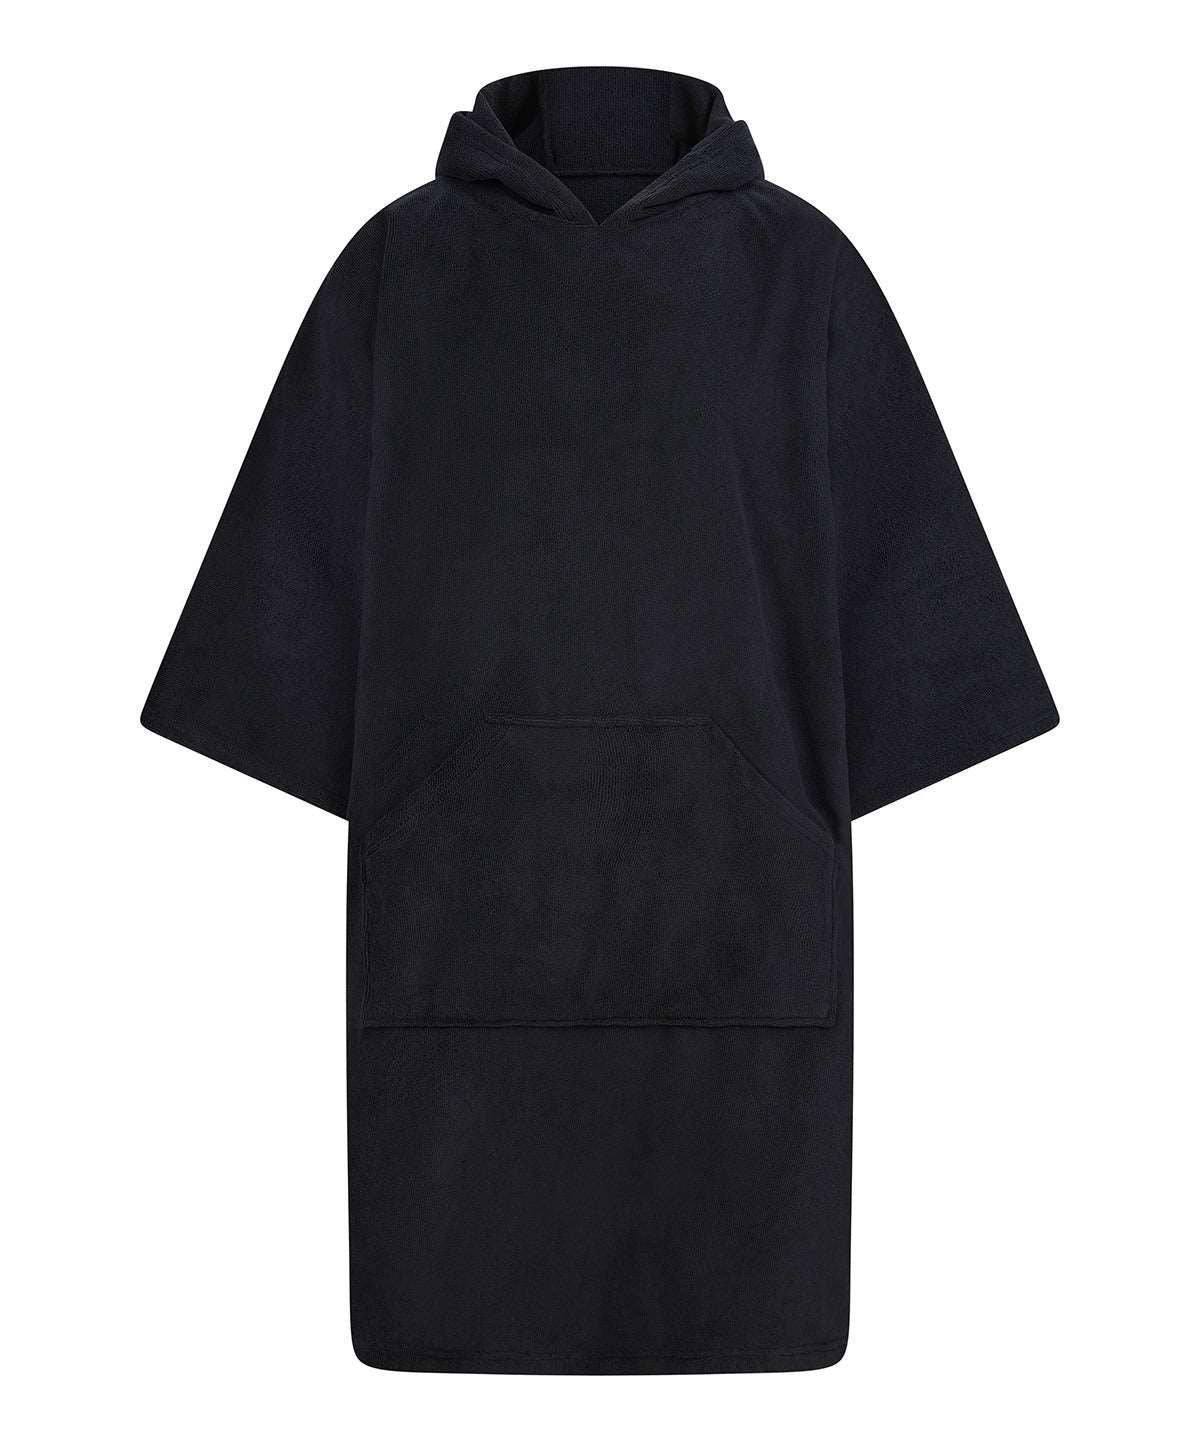 Black - Adults poncho Ponchos Towel City Homewares & Towelling, New in, New Styles For 2022 Schoolwear Centres